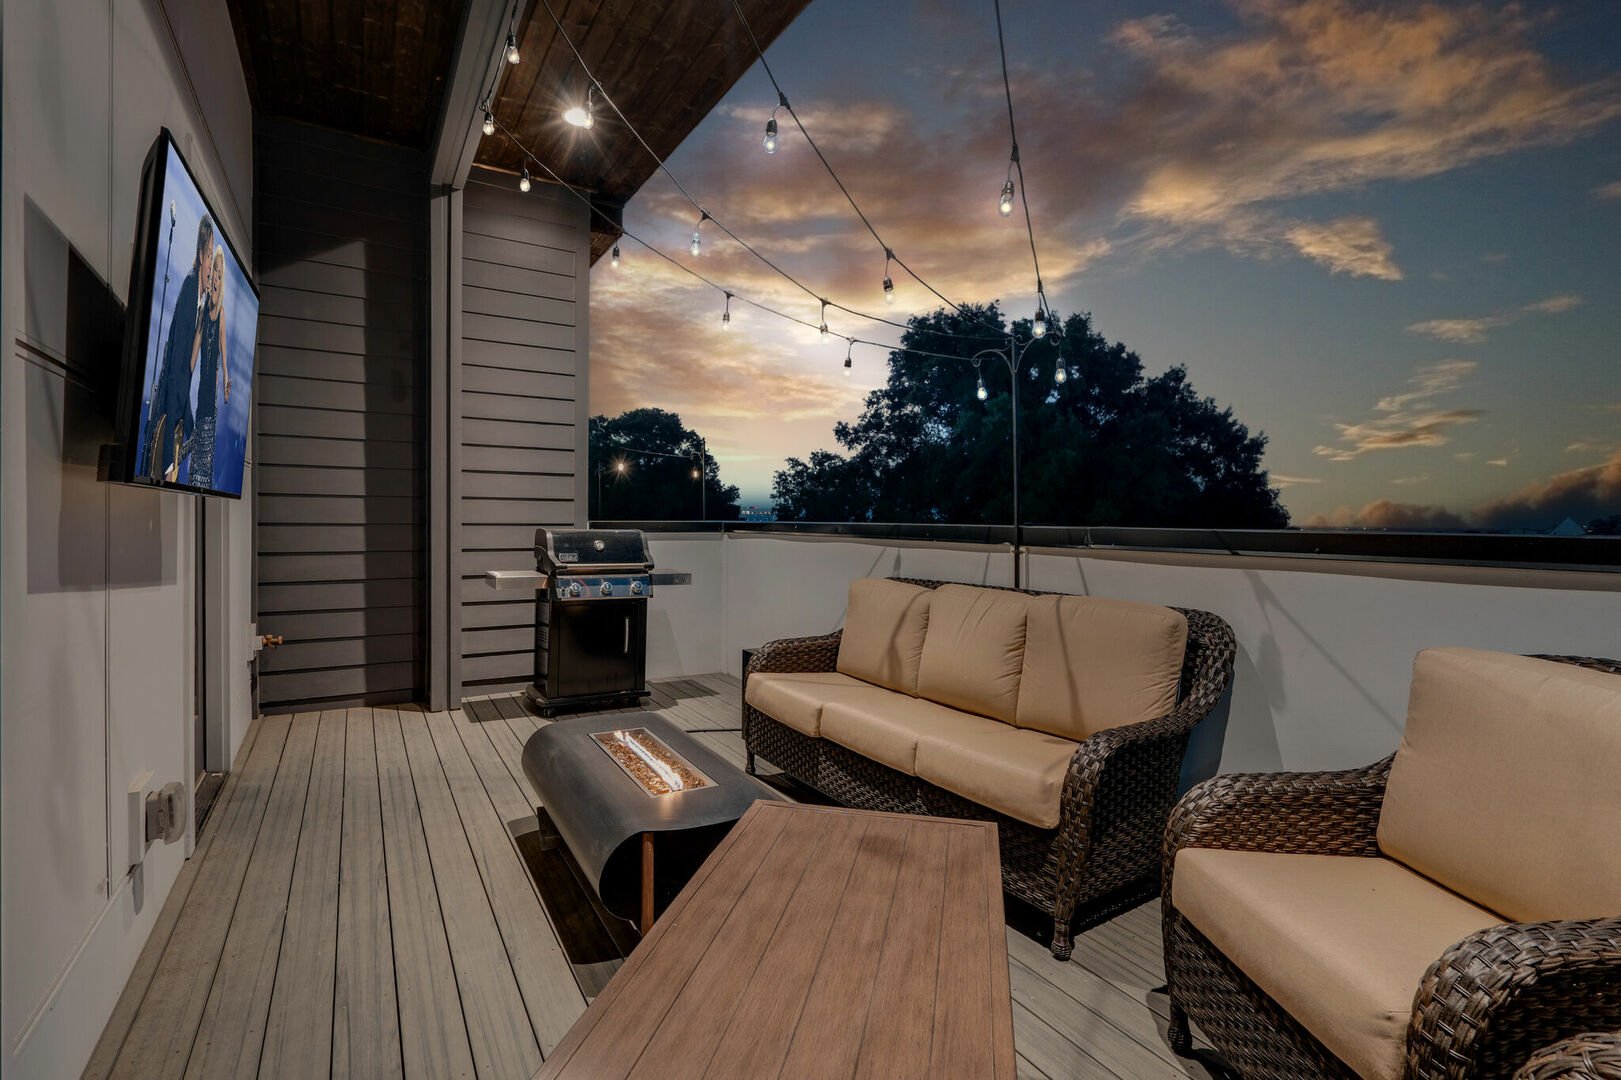 1st unit: Rooftop balcony with outdoor BBQ, smart TV, fire pit, lounge area, and bistro lights.